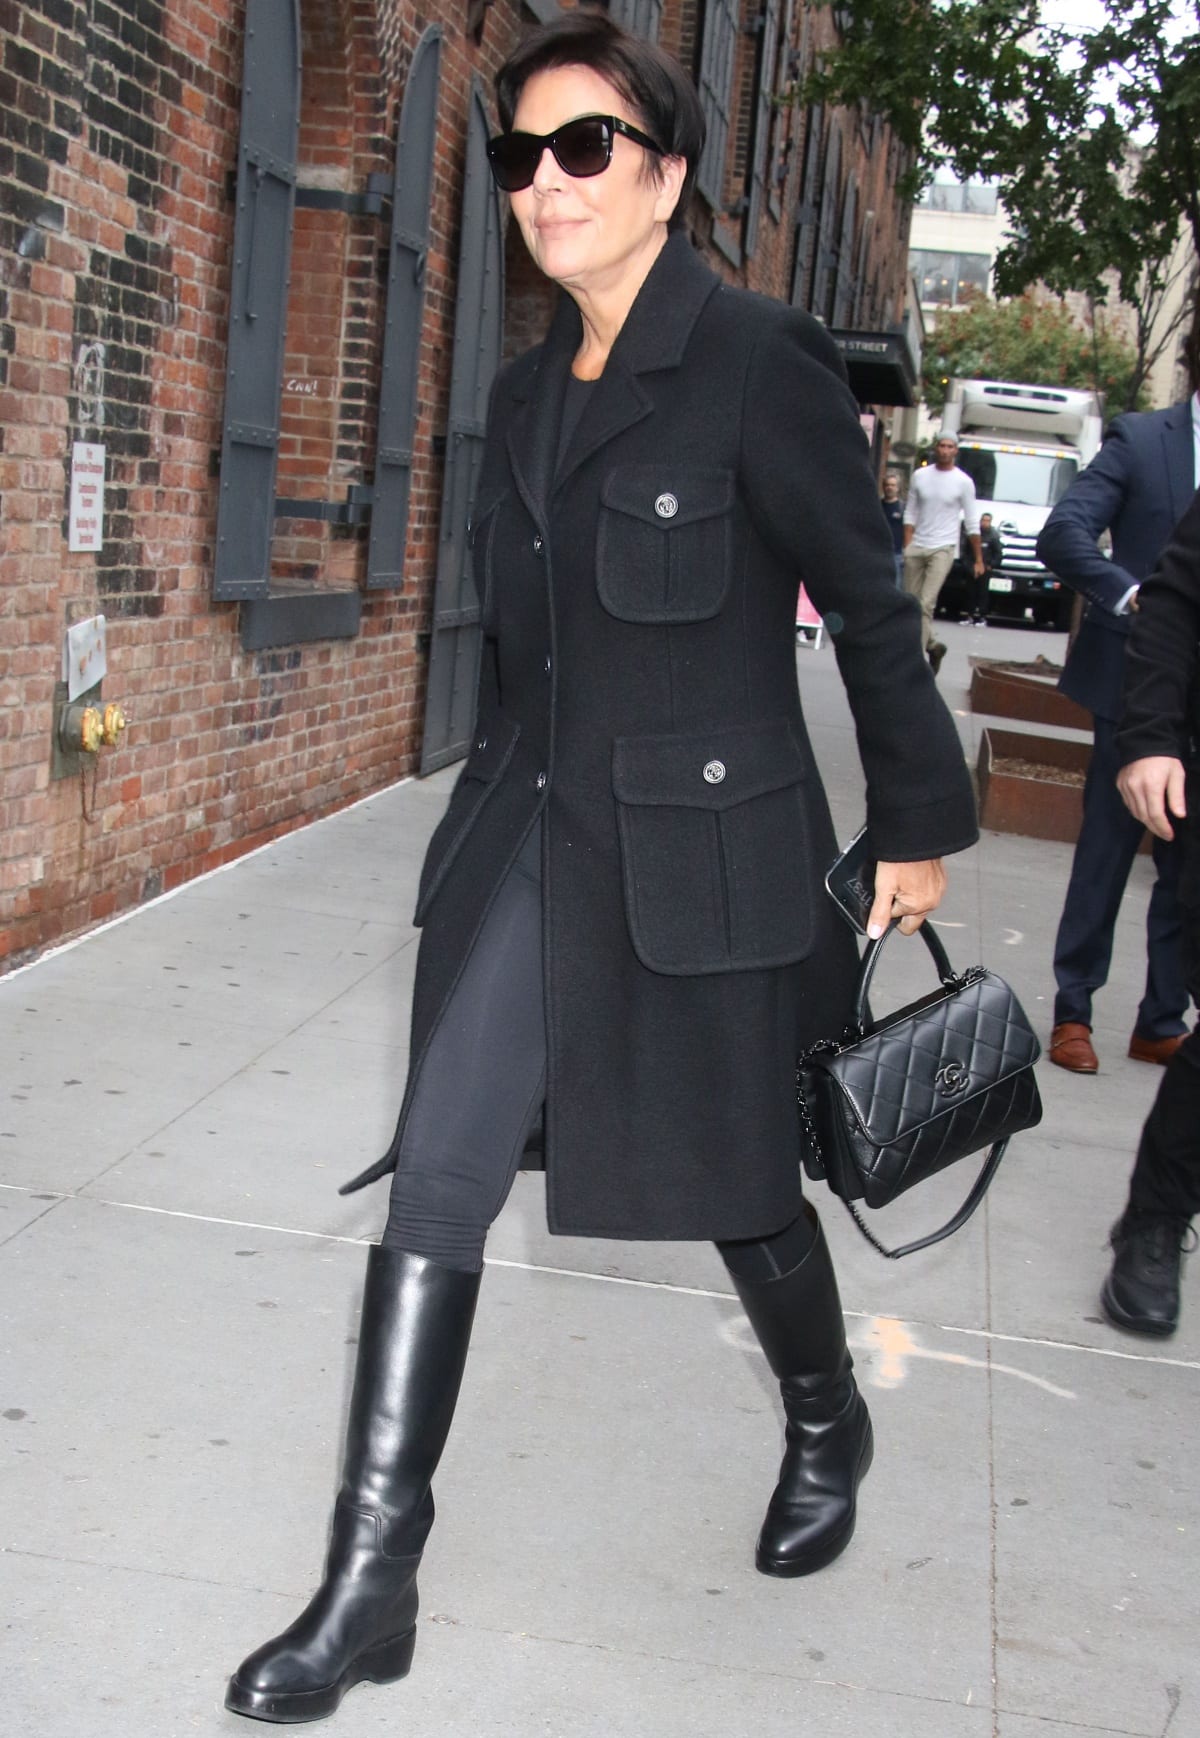 Kris Jenner donning an all-black ensemble as she joined Kim Kardashian in heading to a New York City building that afternoon